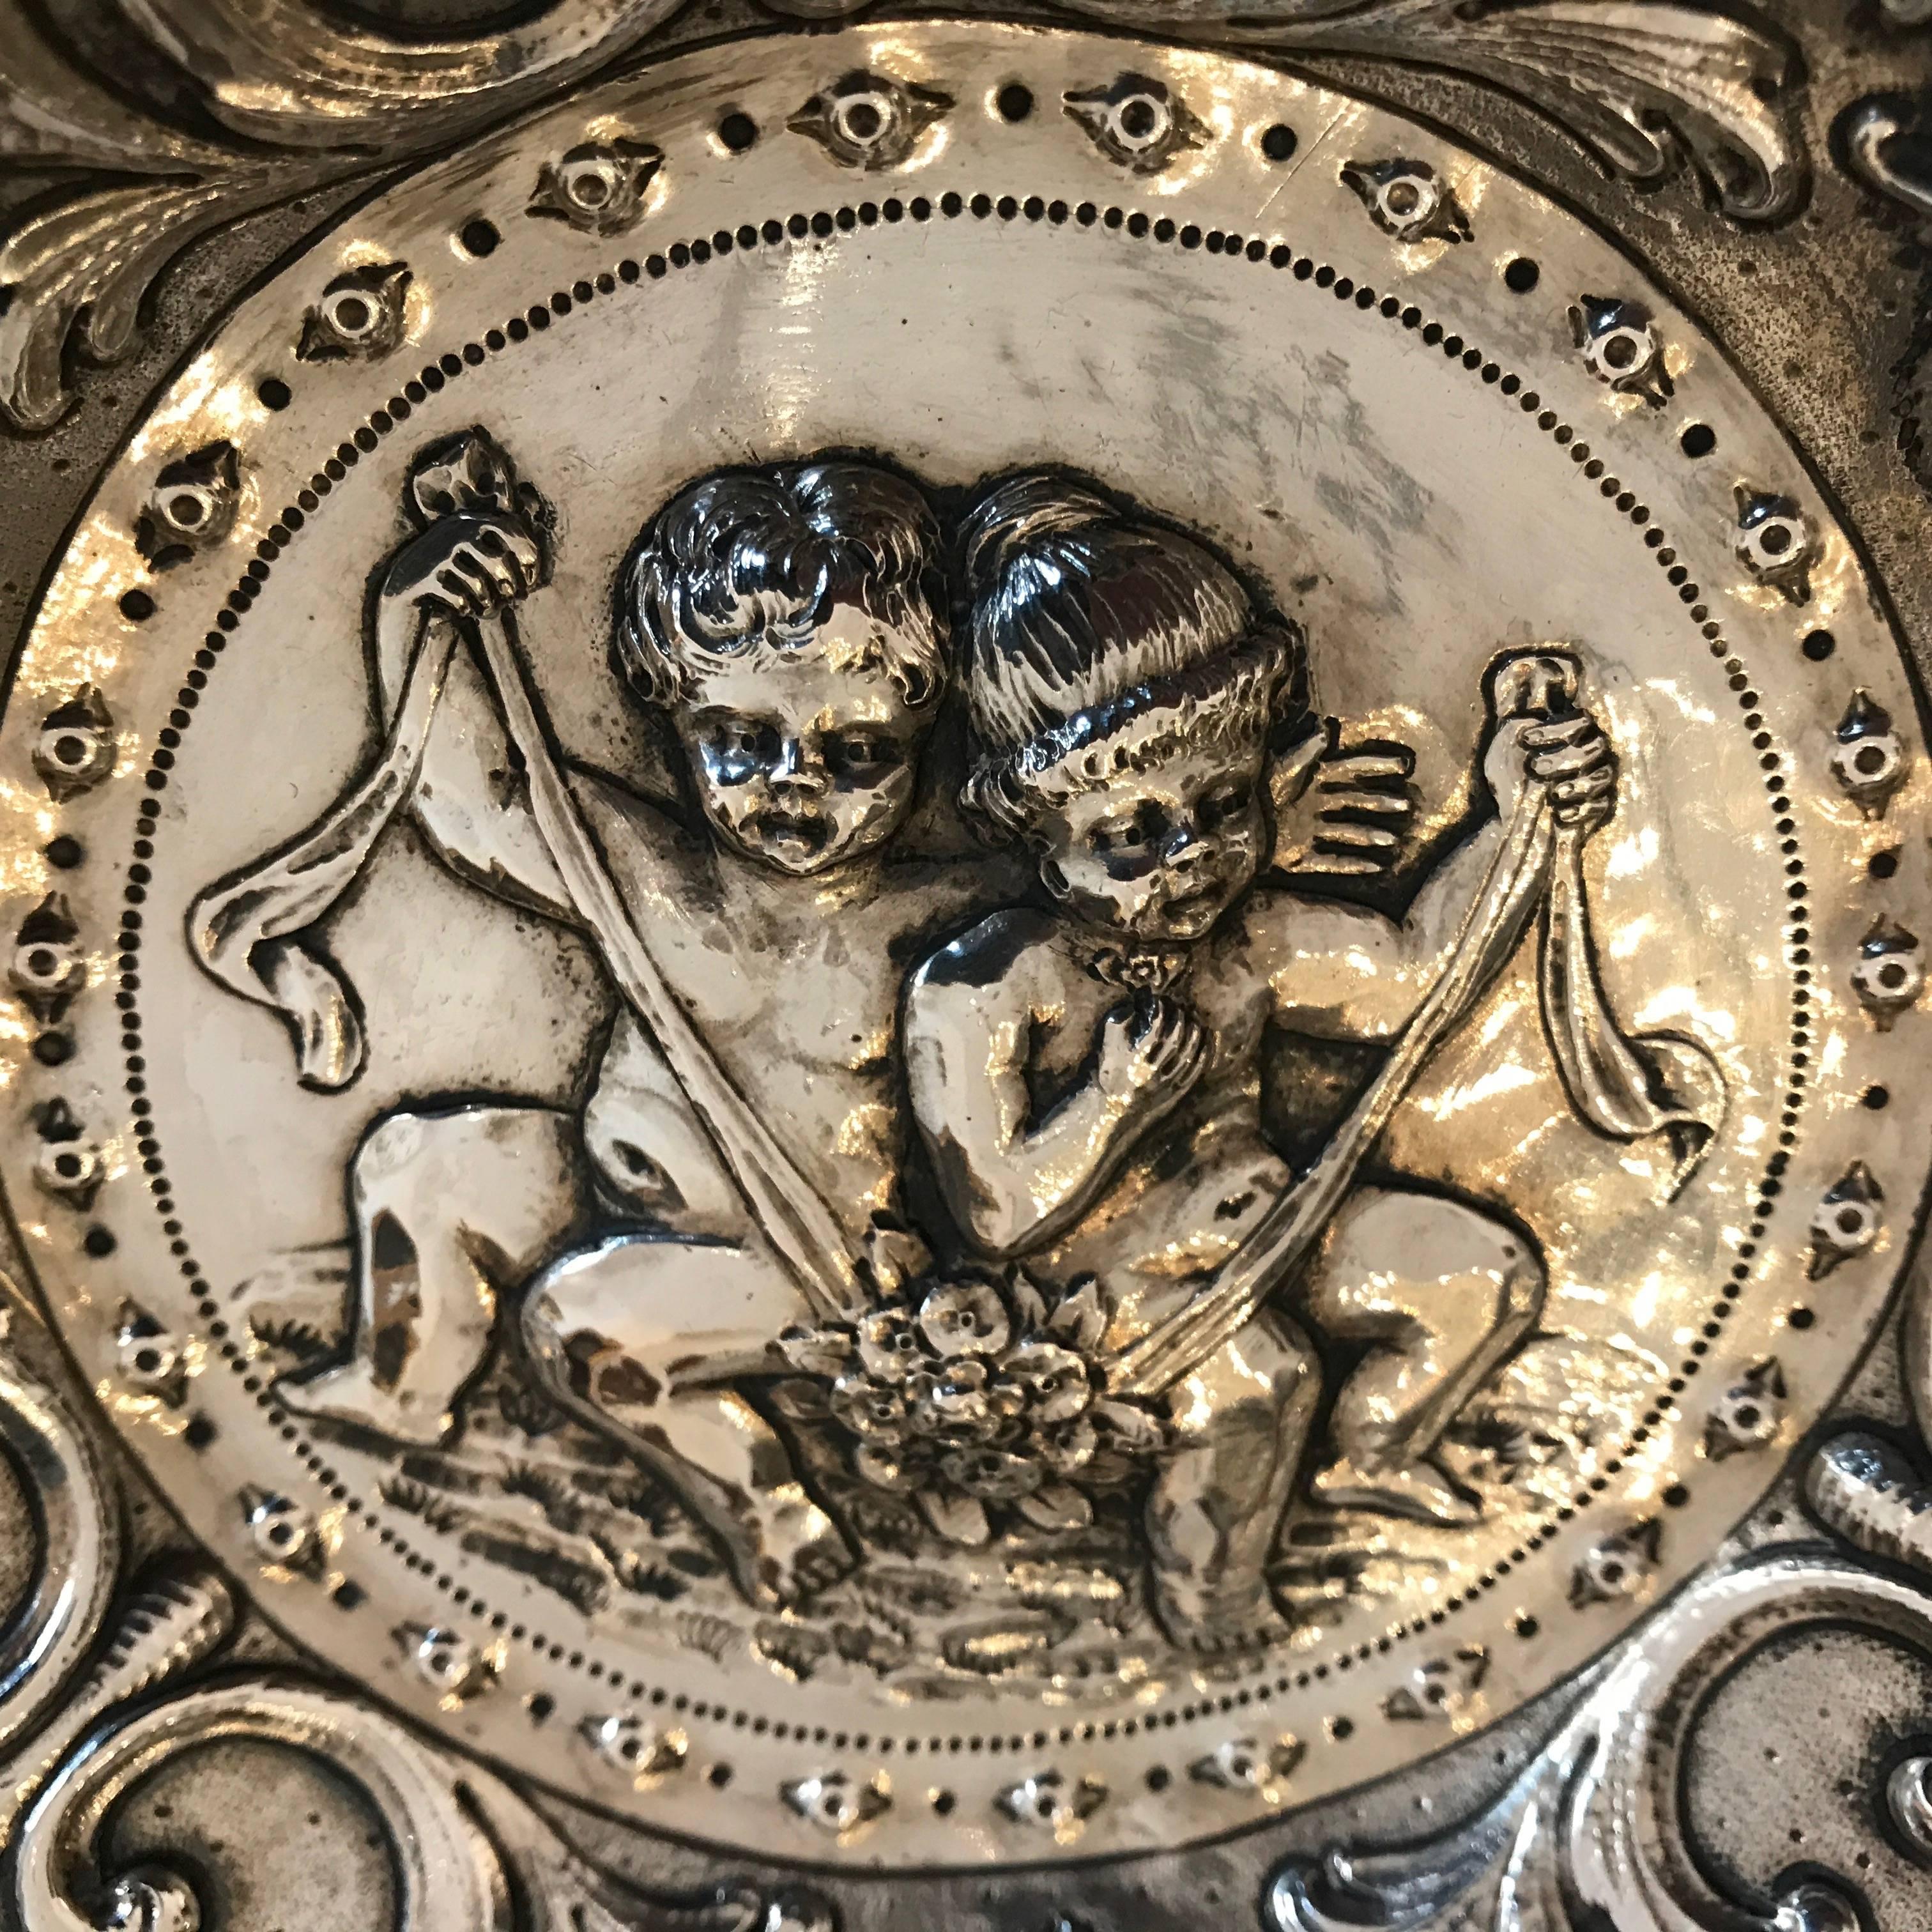 Embossed 19th Century European Repoussé Silver Dish with Children Grotesque Mask FIgures